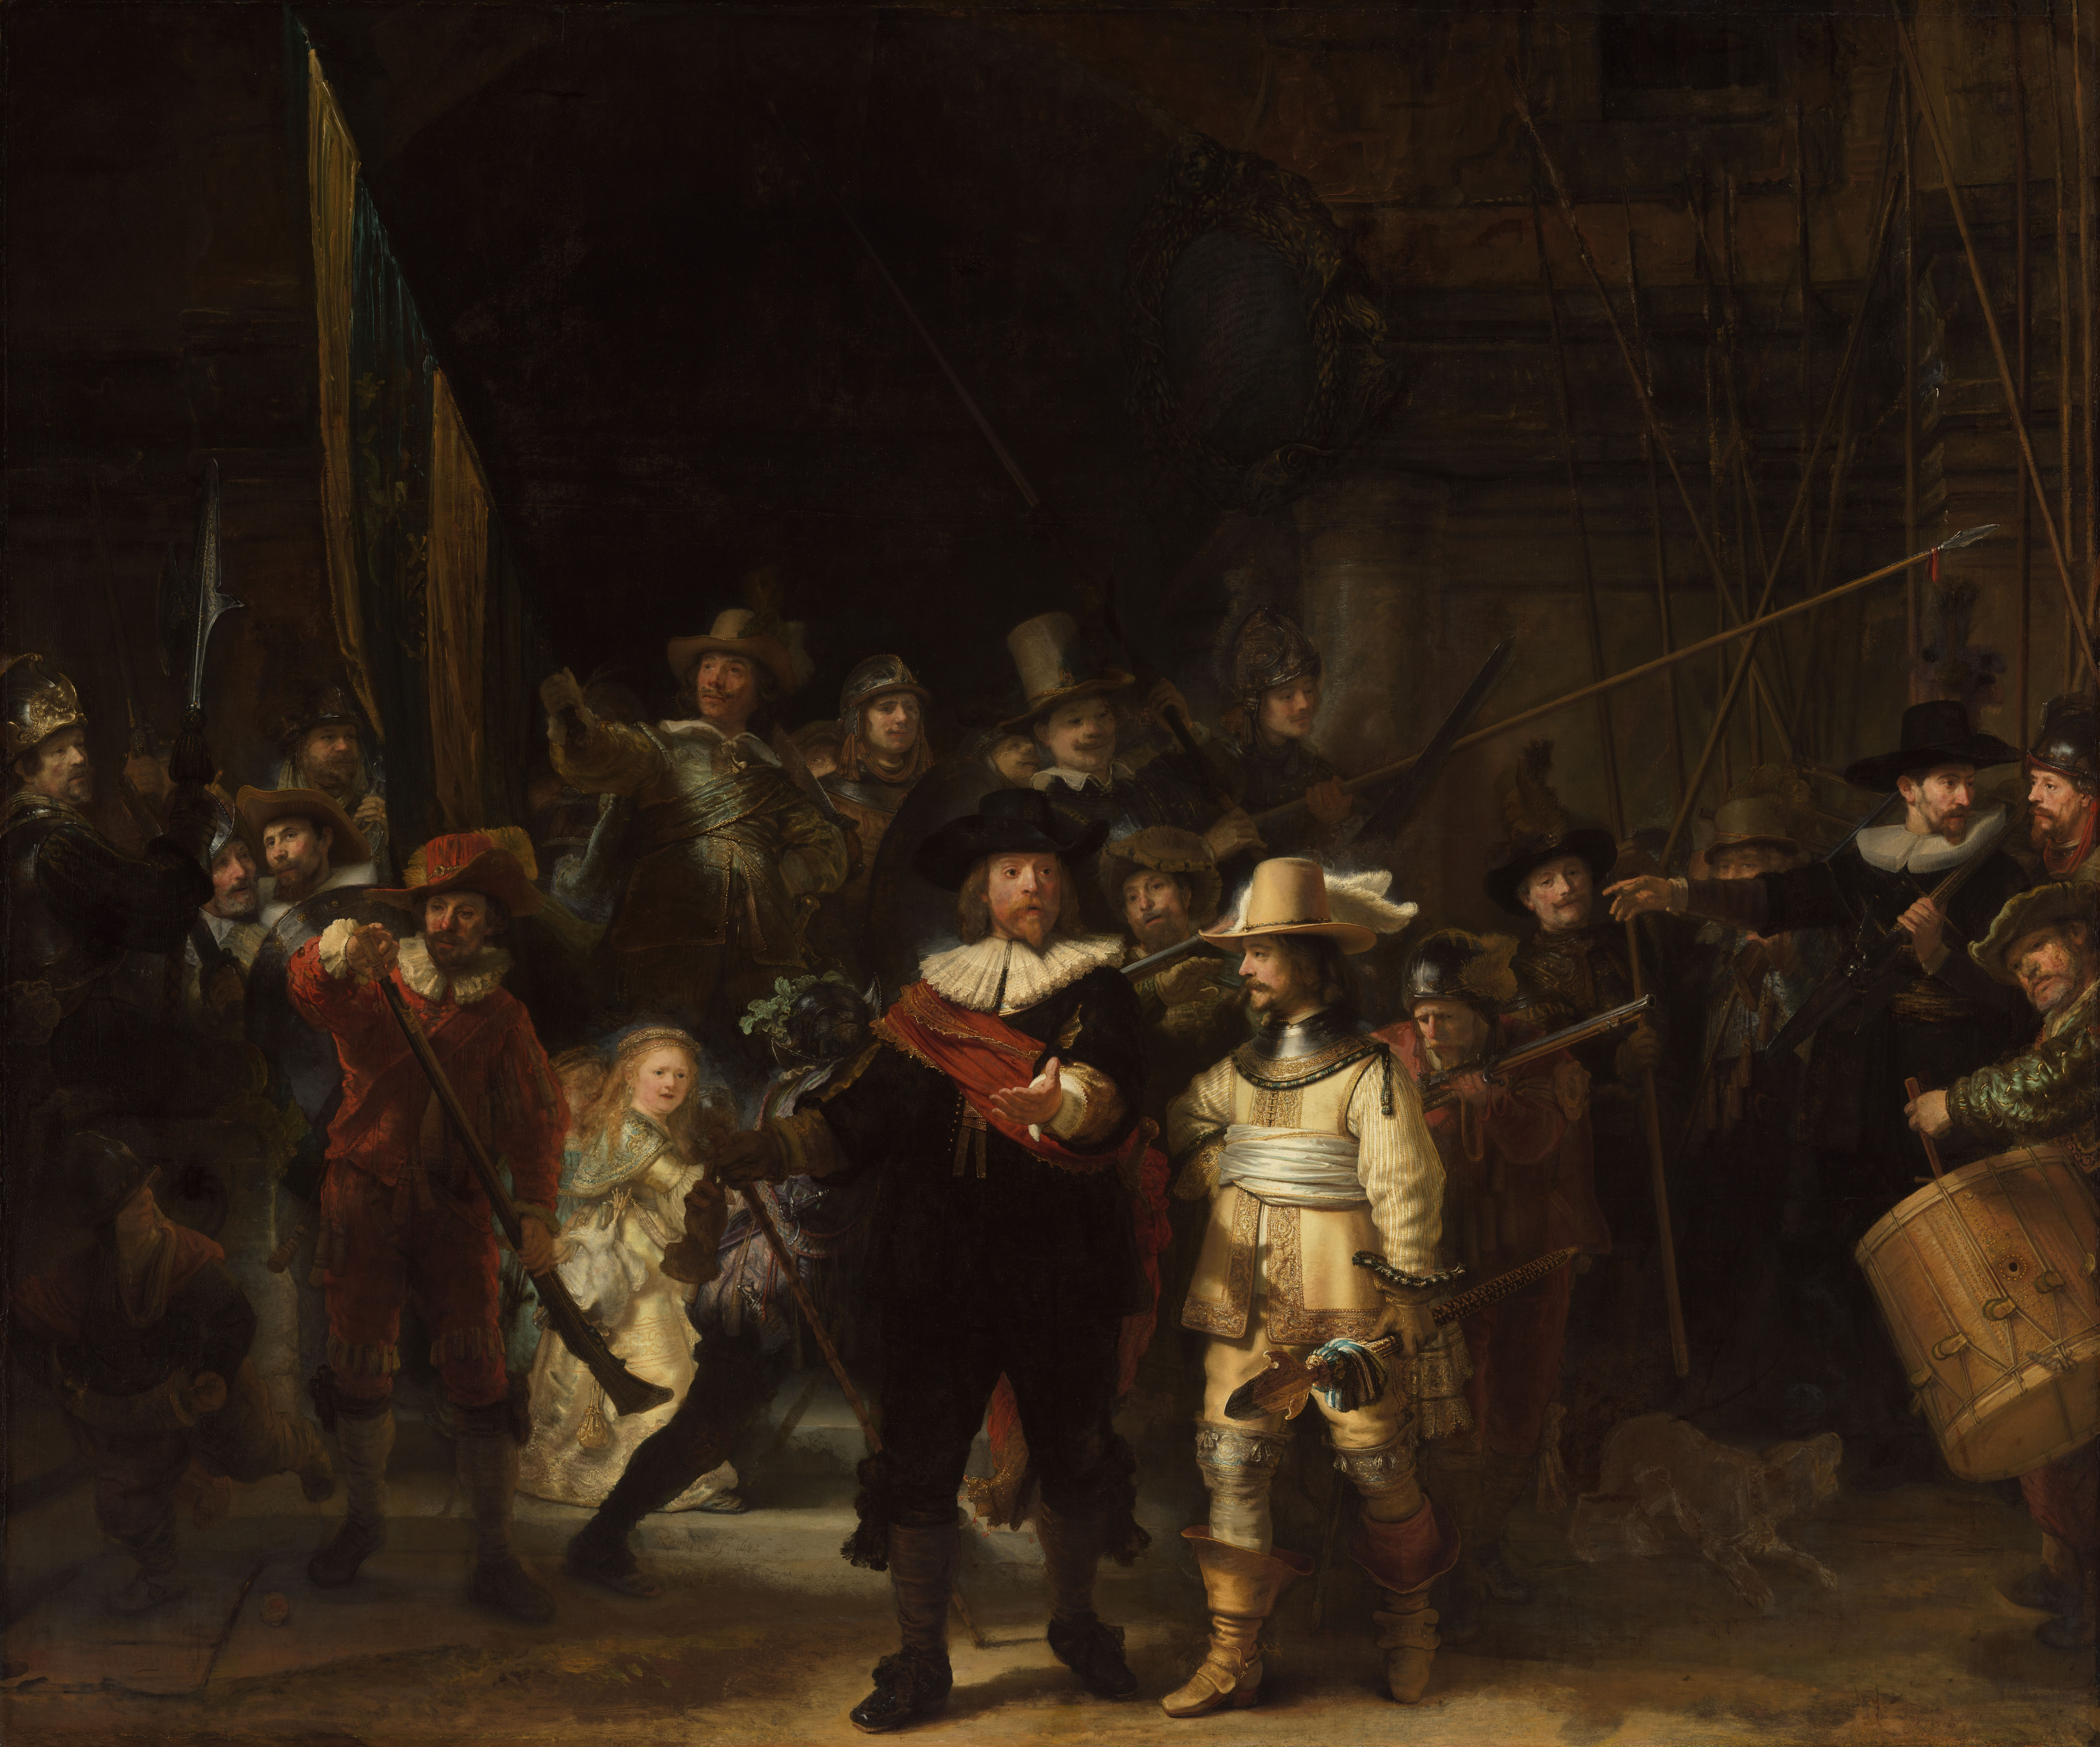 The familiar version of the ‘Night Watch,’ shown here, places the two strolling men in the foreground at the center of the composition. The restorations of the trimmed material shift the pair to the right. Image courtesy of the Rijksmuseum.